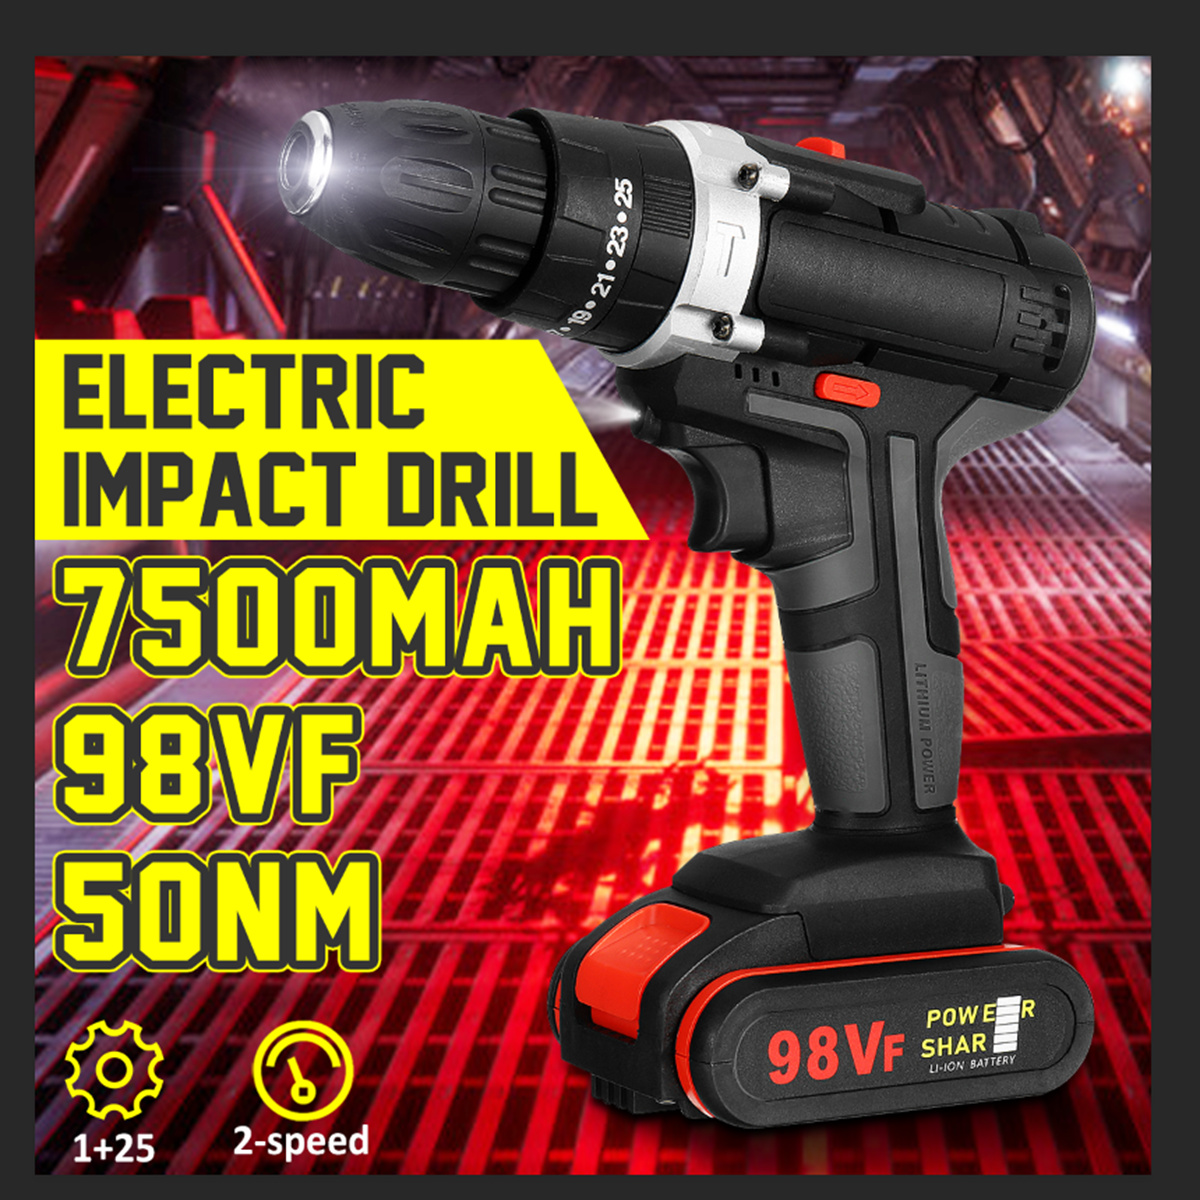 98VF-Rechargeable-Electric-Cordless-Impact-Drill-Screwdriver-251-Torque-LED-1569430-1